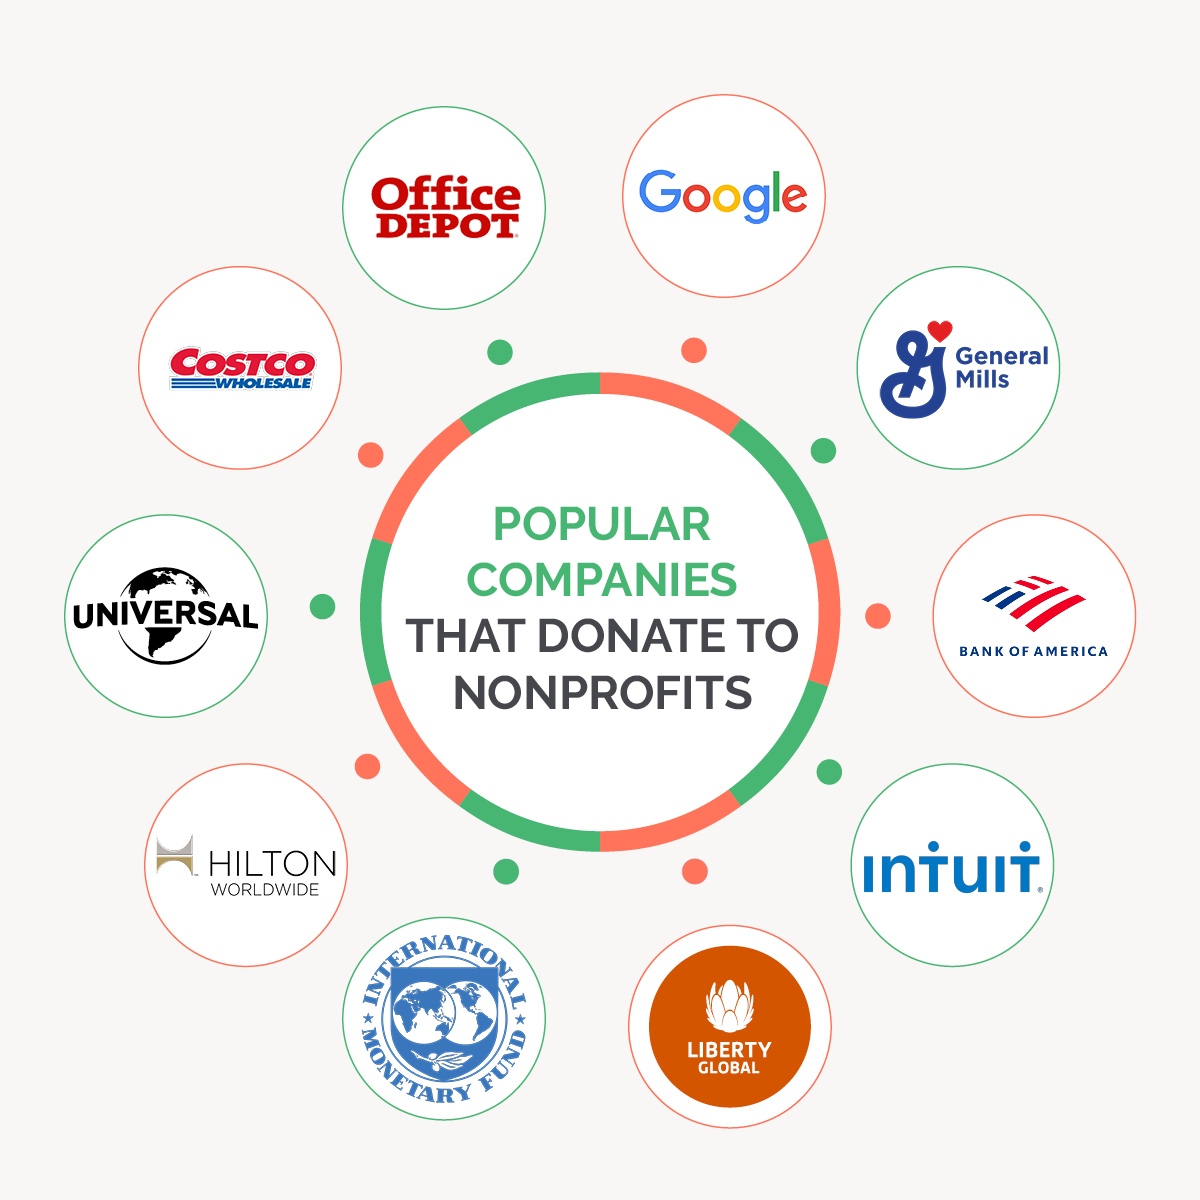 Popular Companies That Donate to Nonprofits